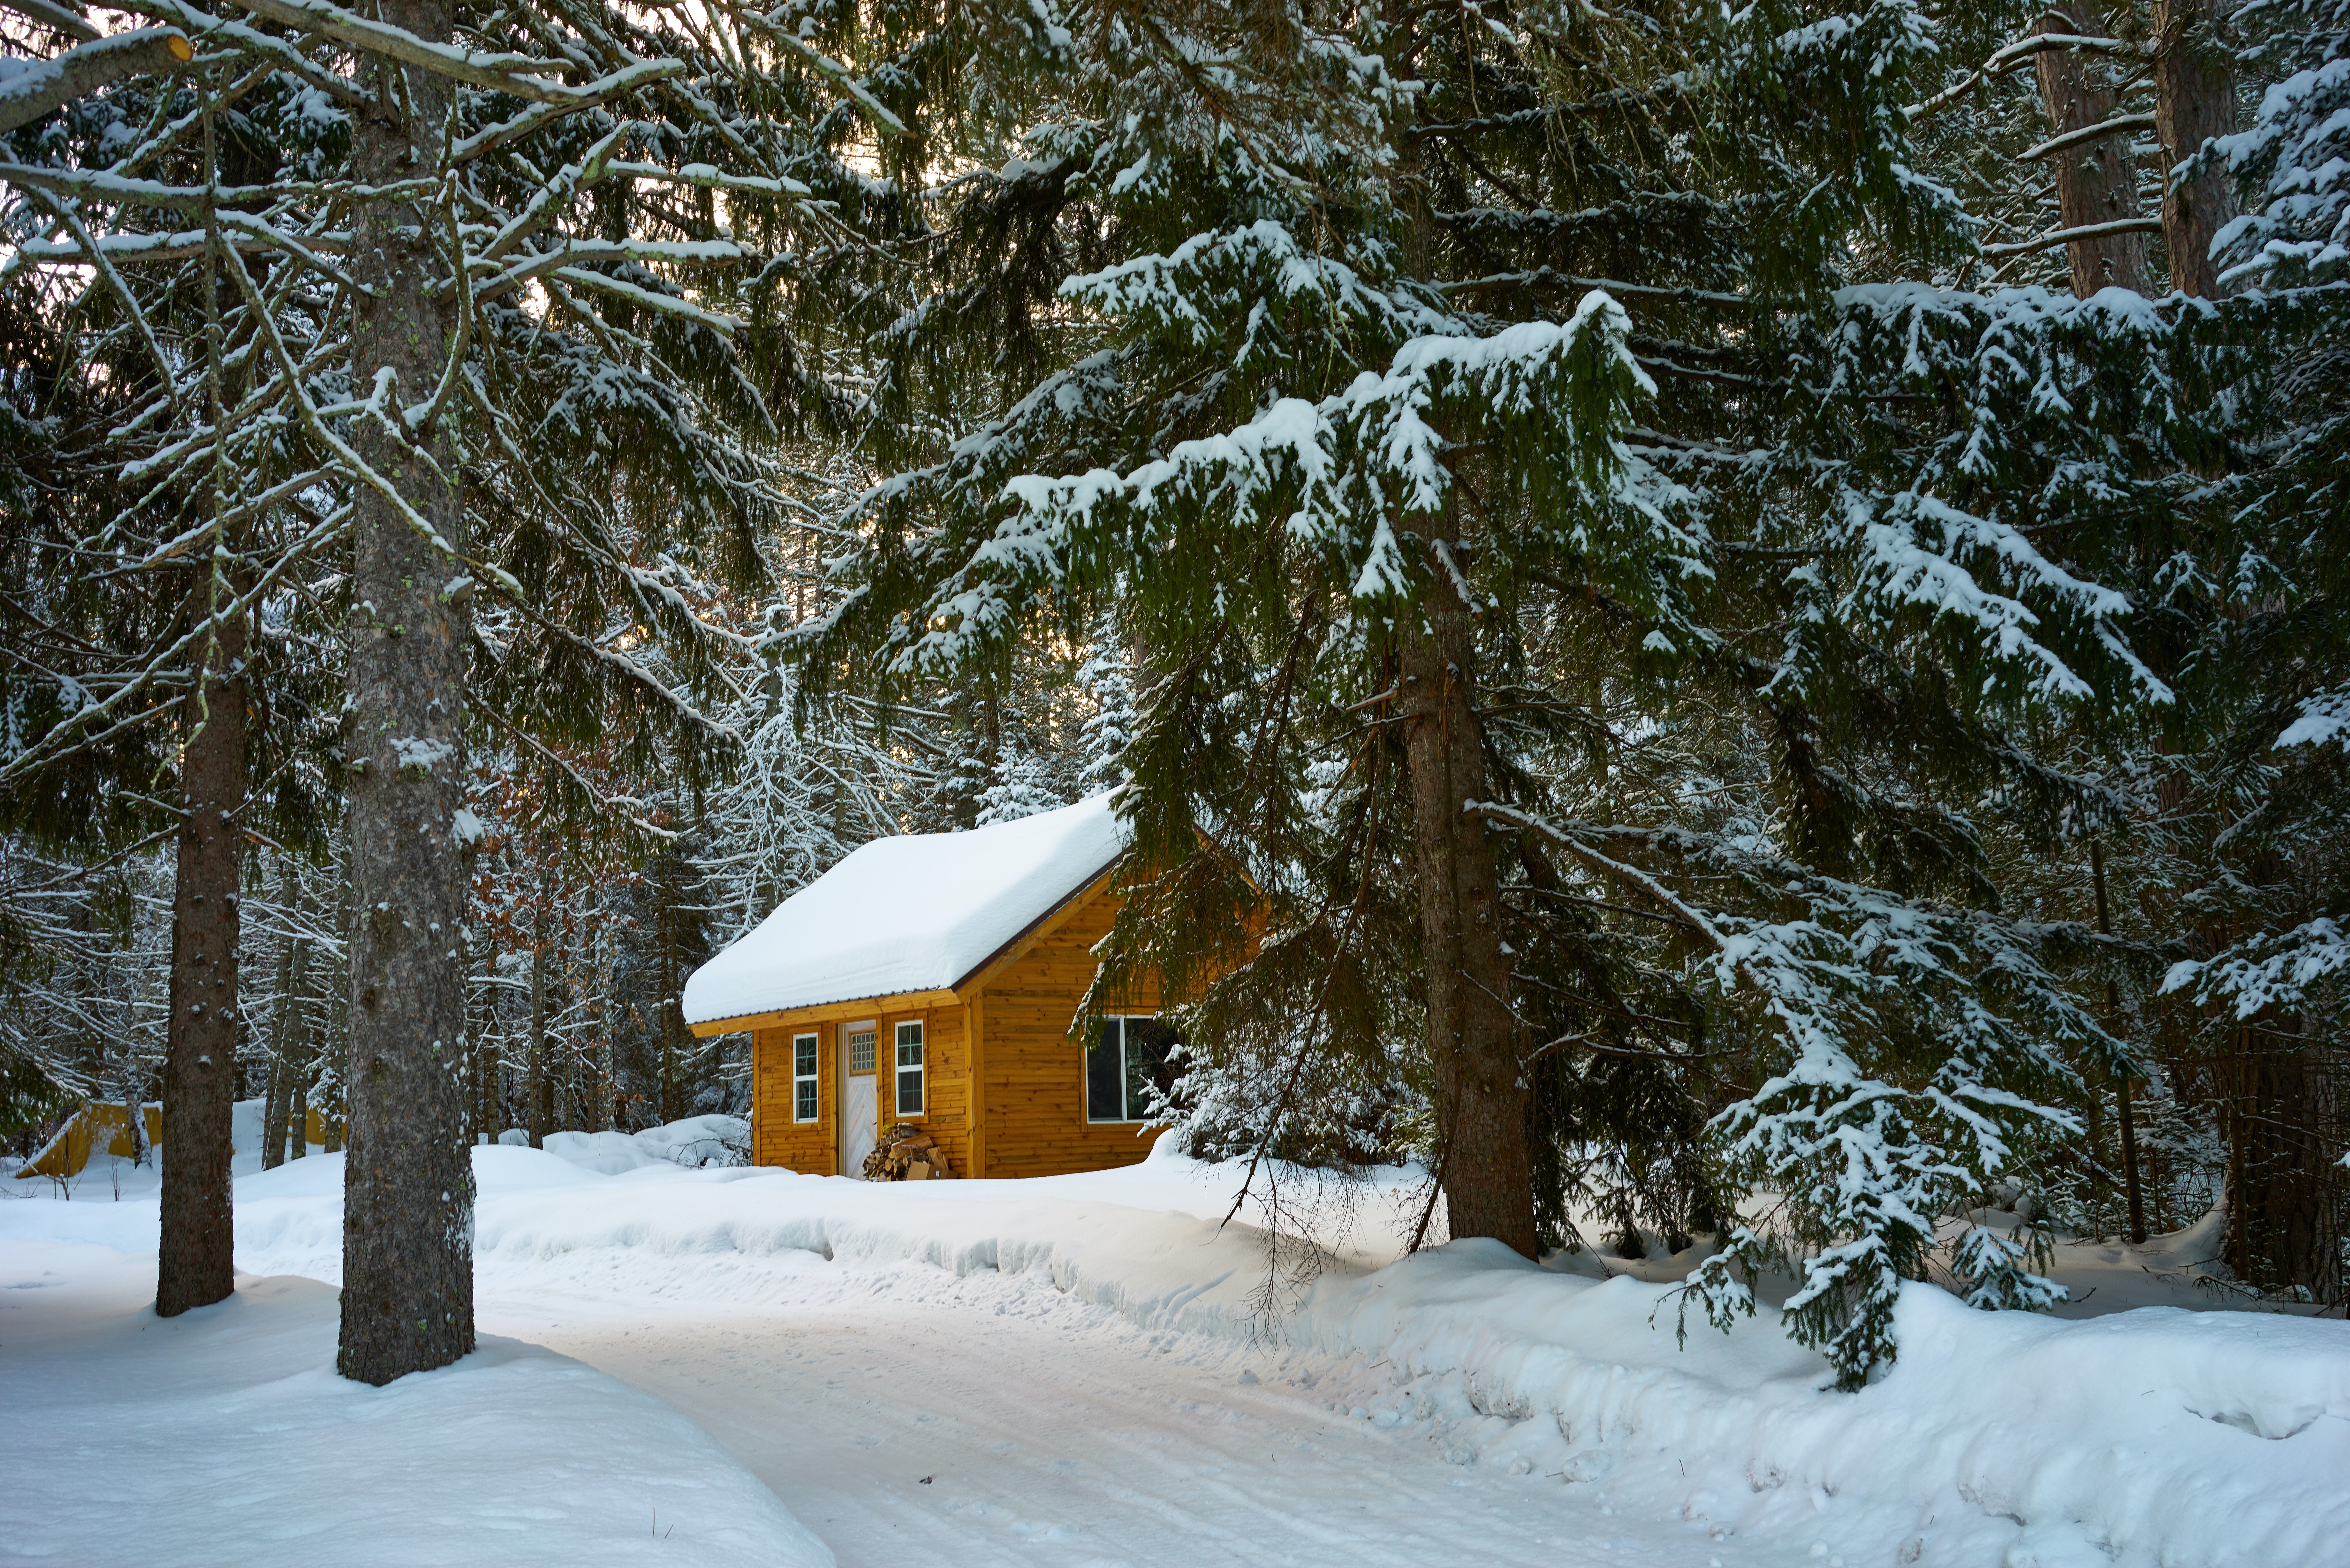 Check Out our Hocking Hills Winter Cabins